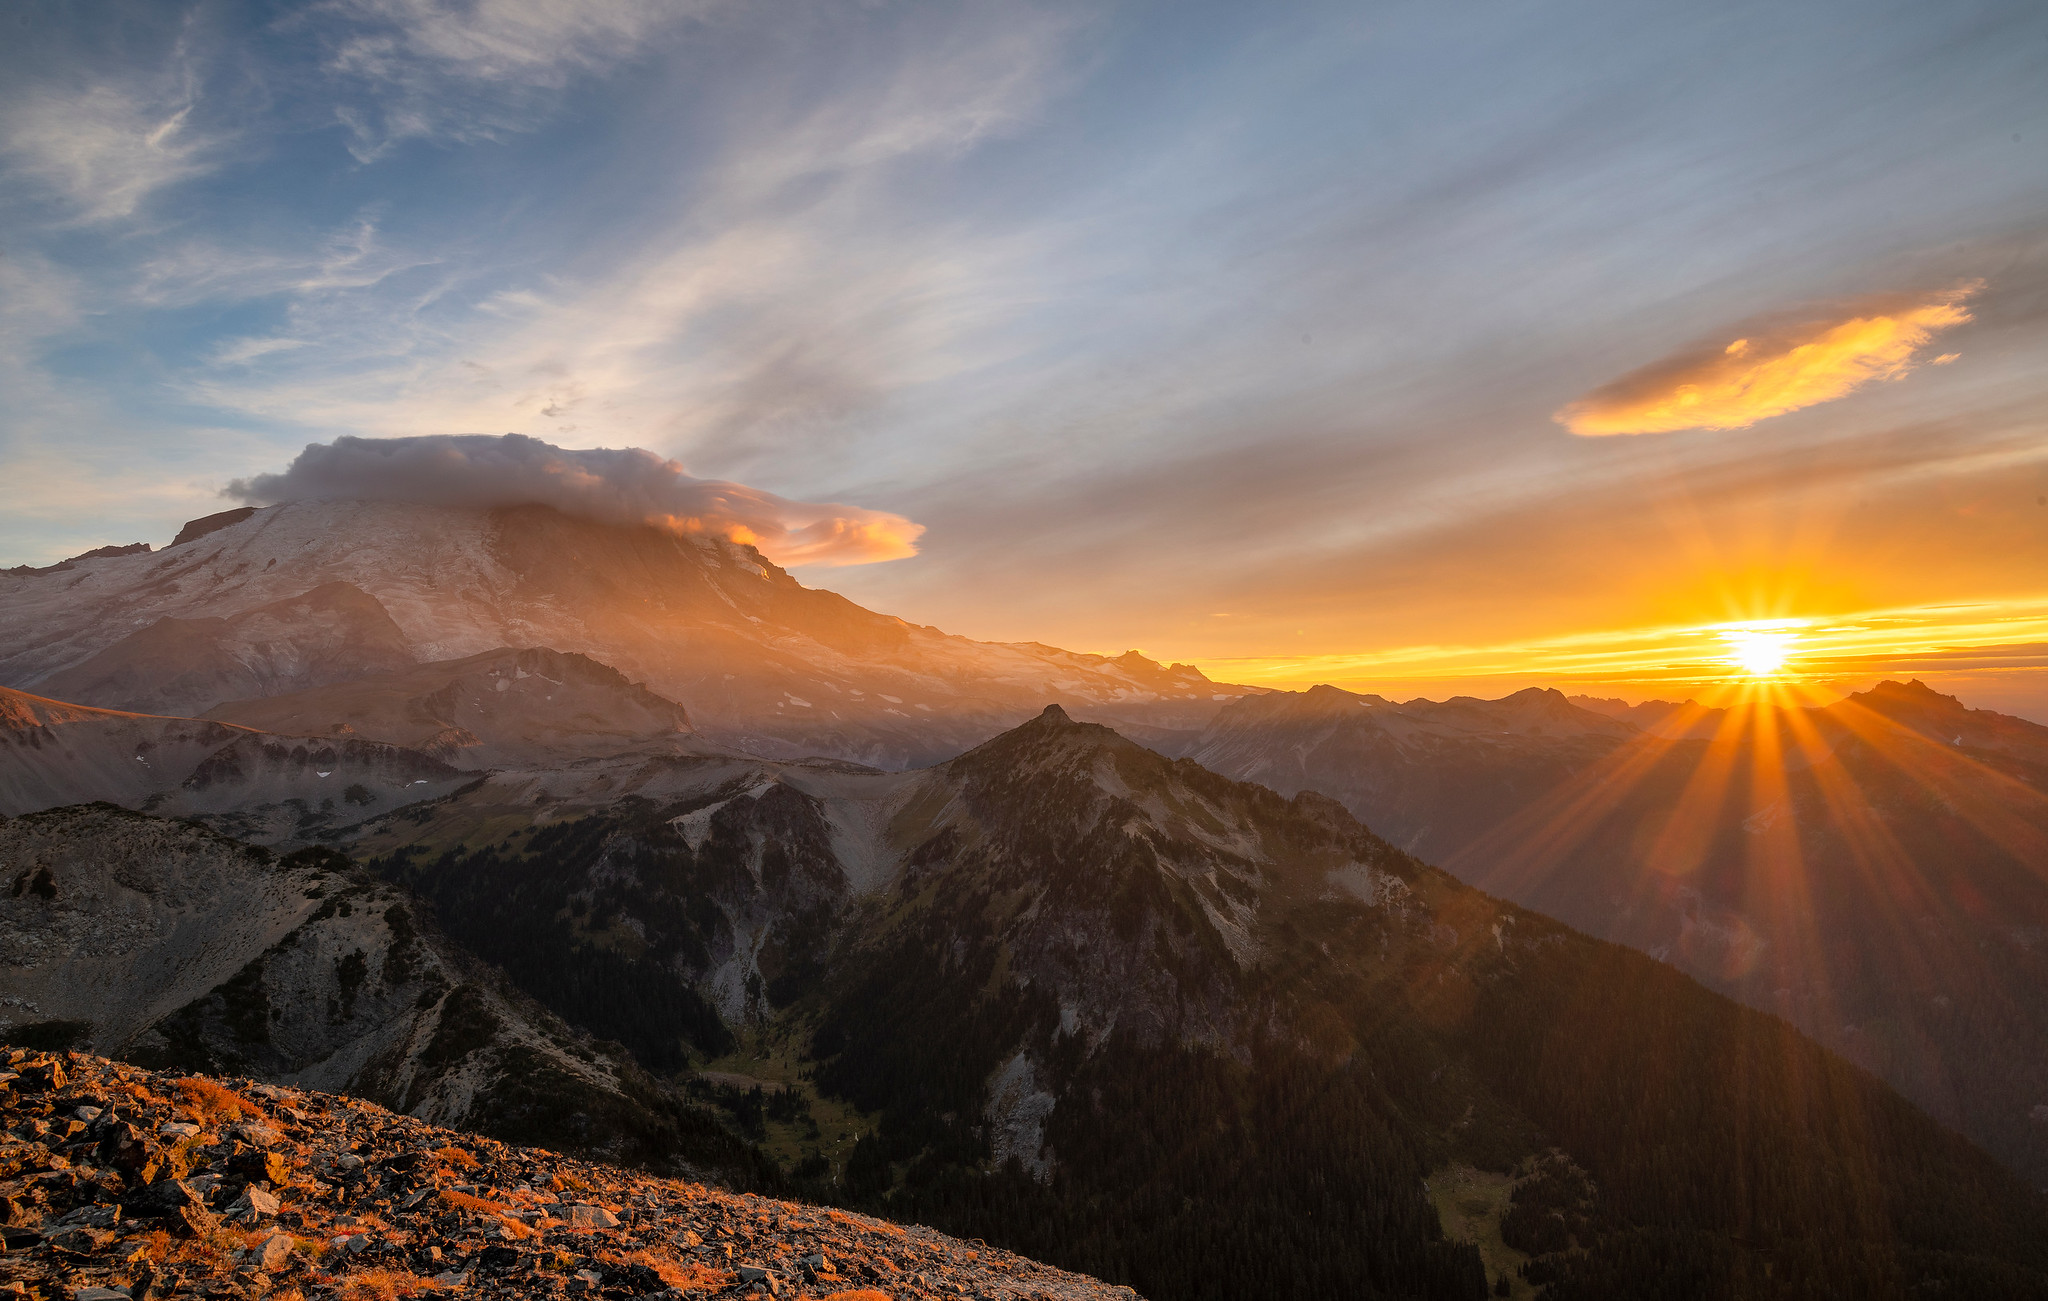 Sunset at Mount Rainier by Peter Cheung